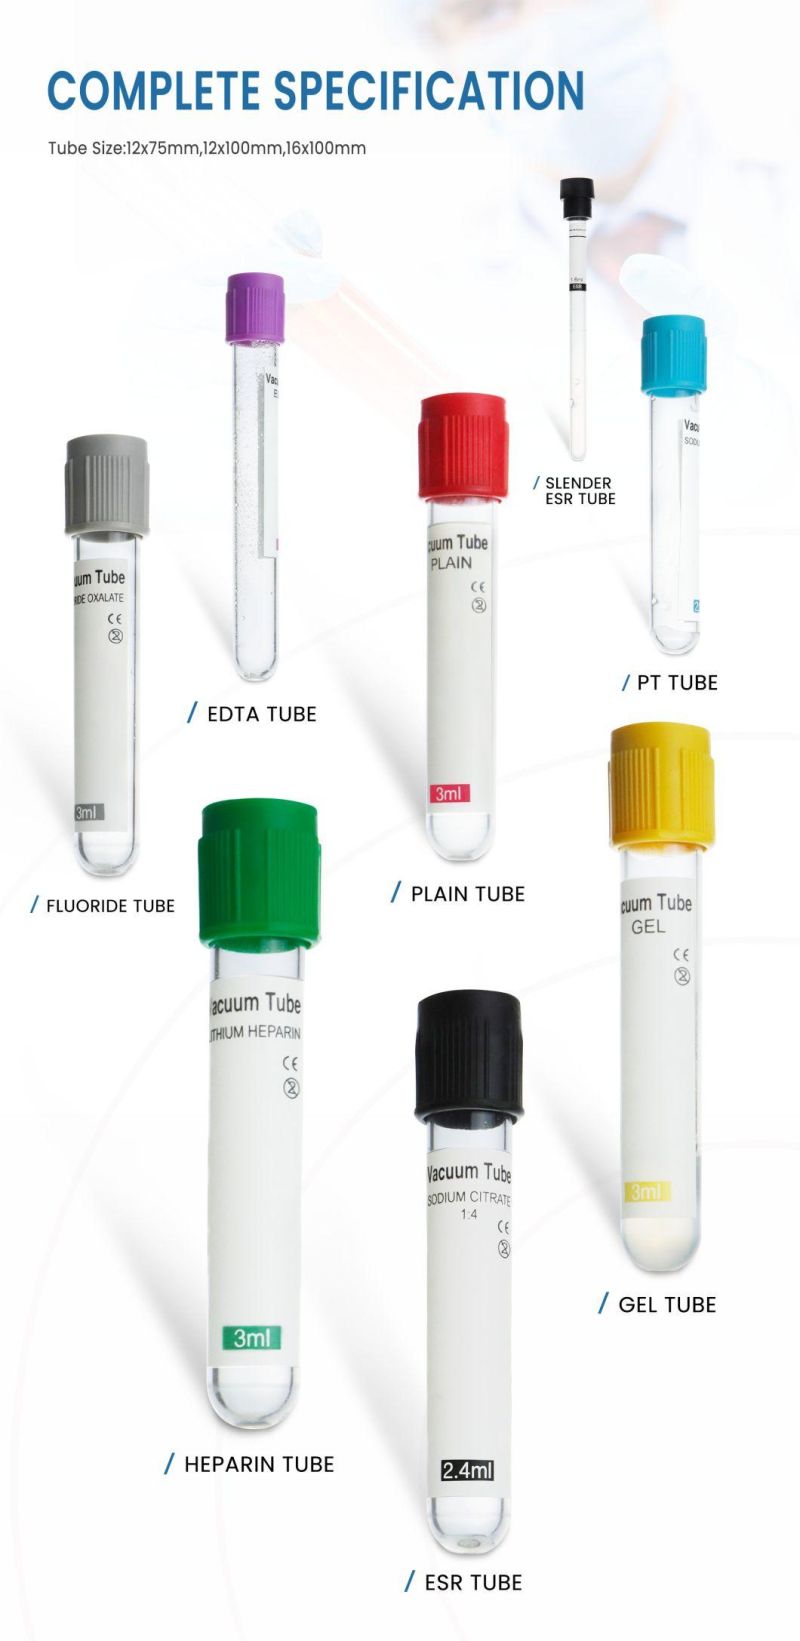 Hospital Medical Vacuum Blood Collection Test Tube CE Approved for Single Use